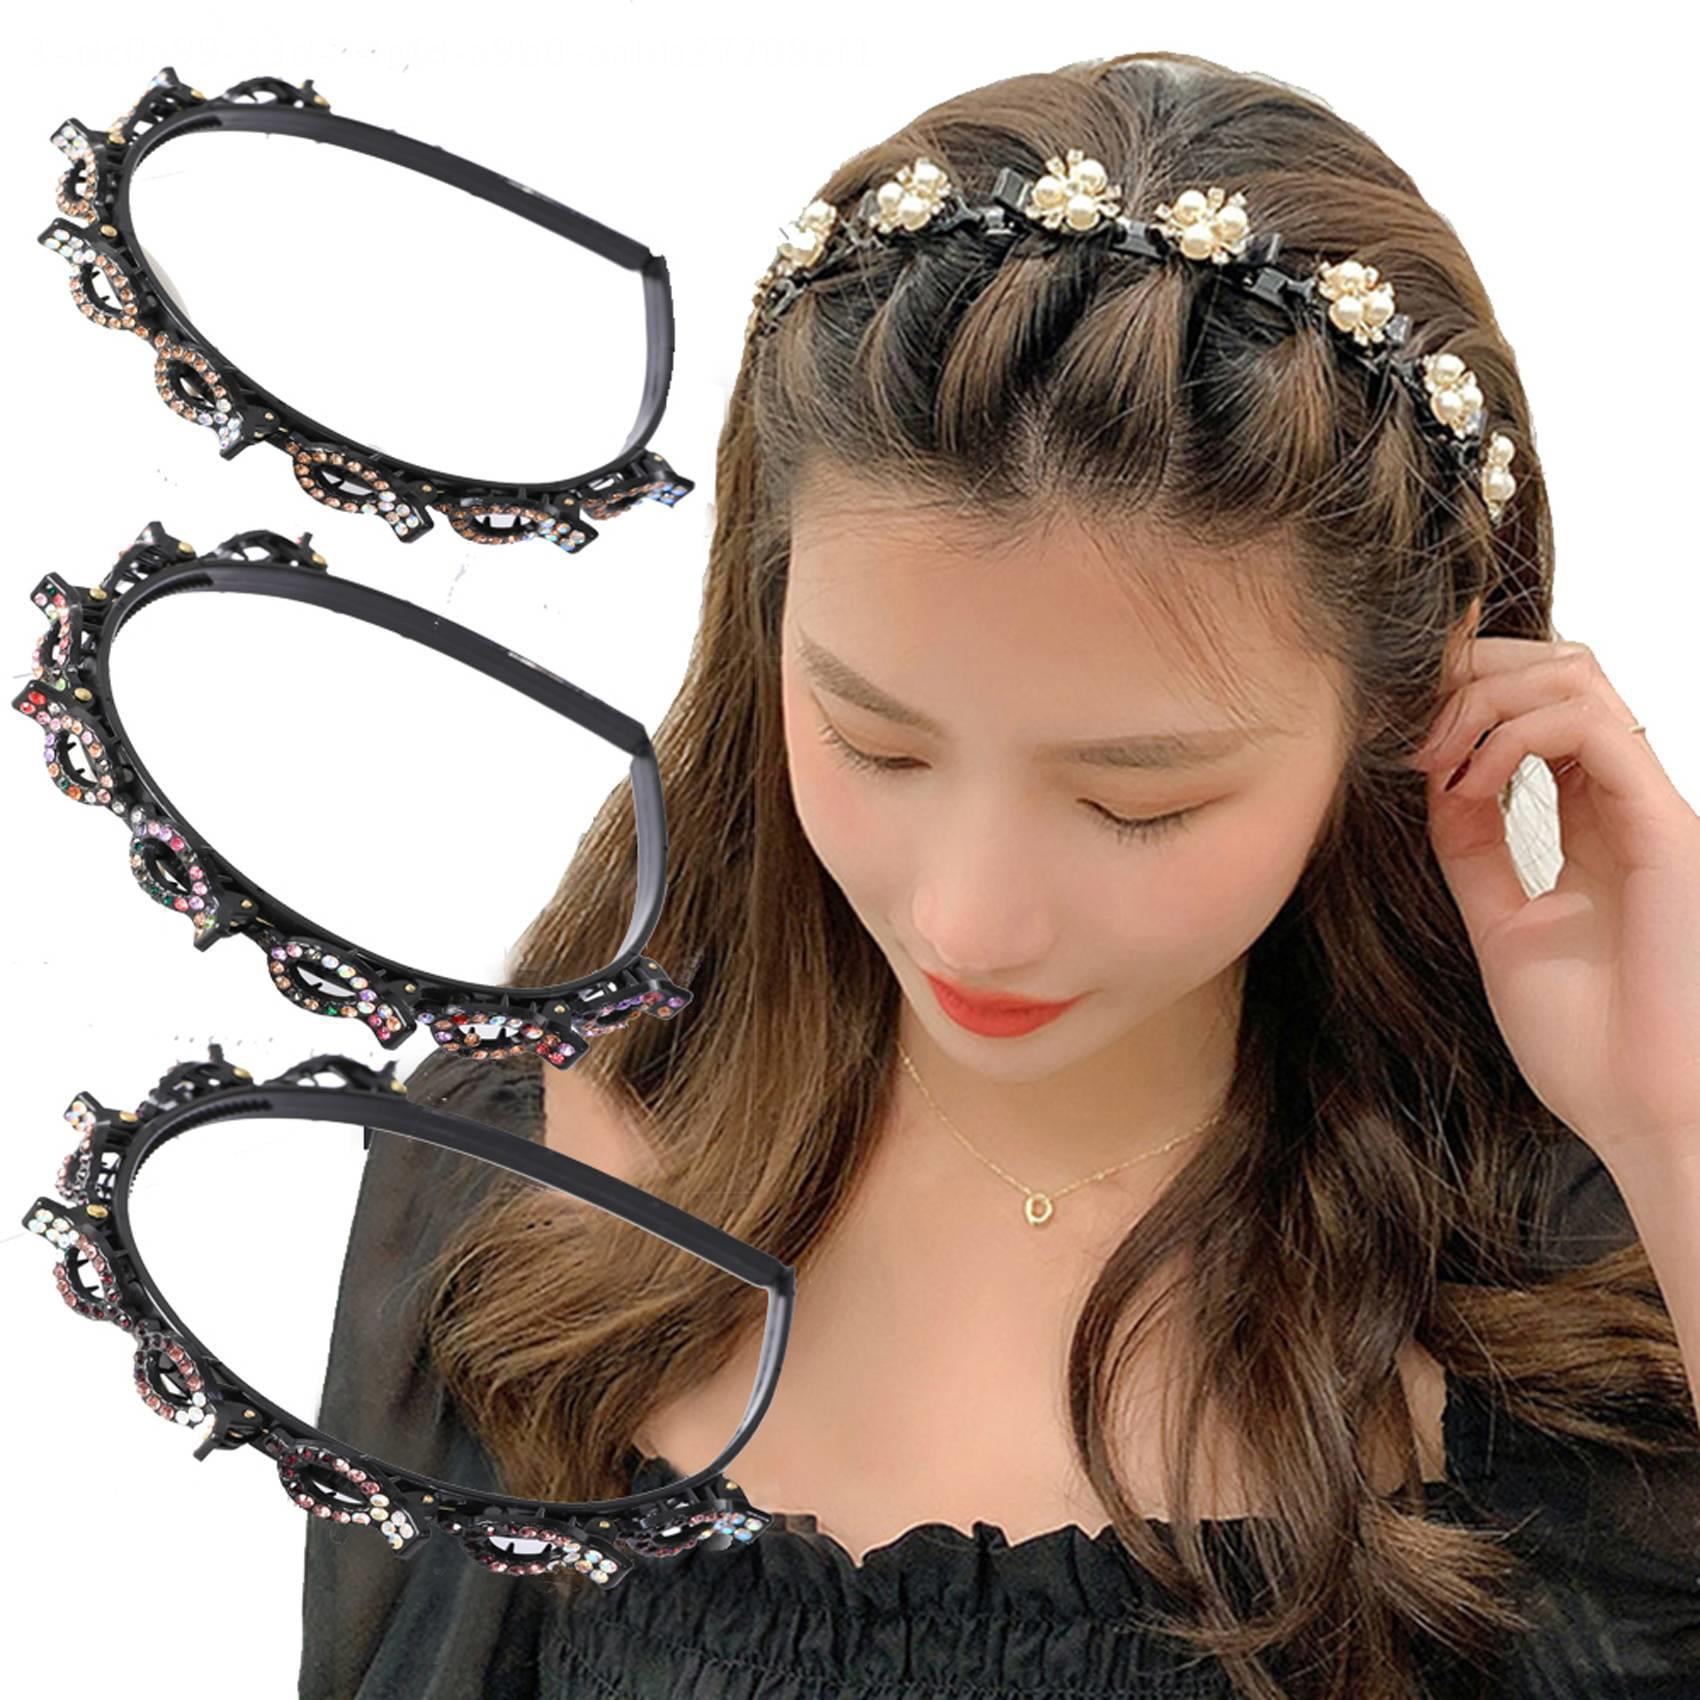 Details about   Women's Bohemia Headband Floral Wide Stretch Hair Band Twisted Knotted Floral 